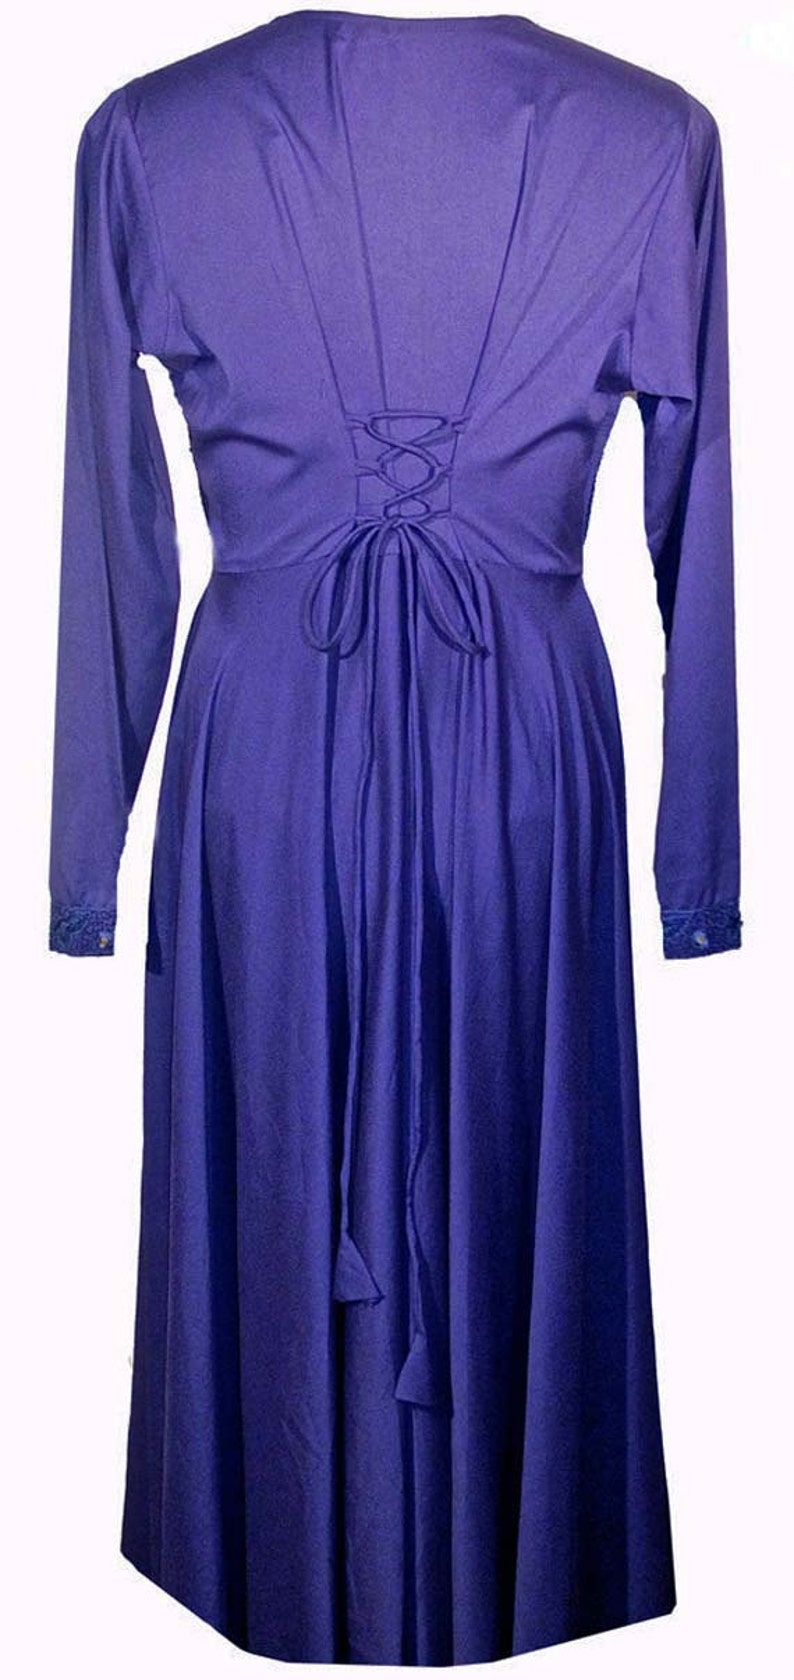 Vintage Embroidered Dress / Purple / Long Sleeves / Mirror Accents / Lace-Up Back / 1970s Fits Size Small to Medium image 5